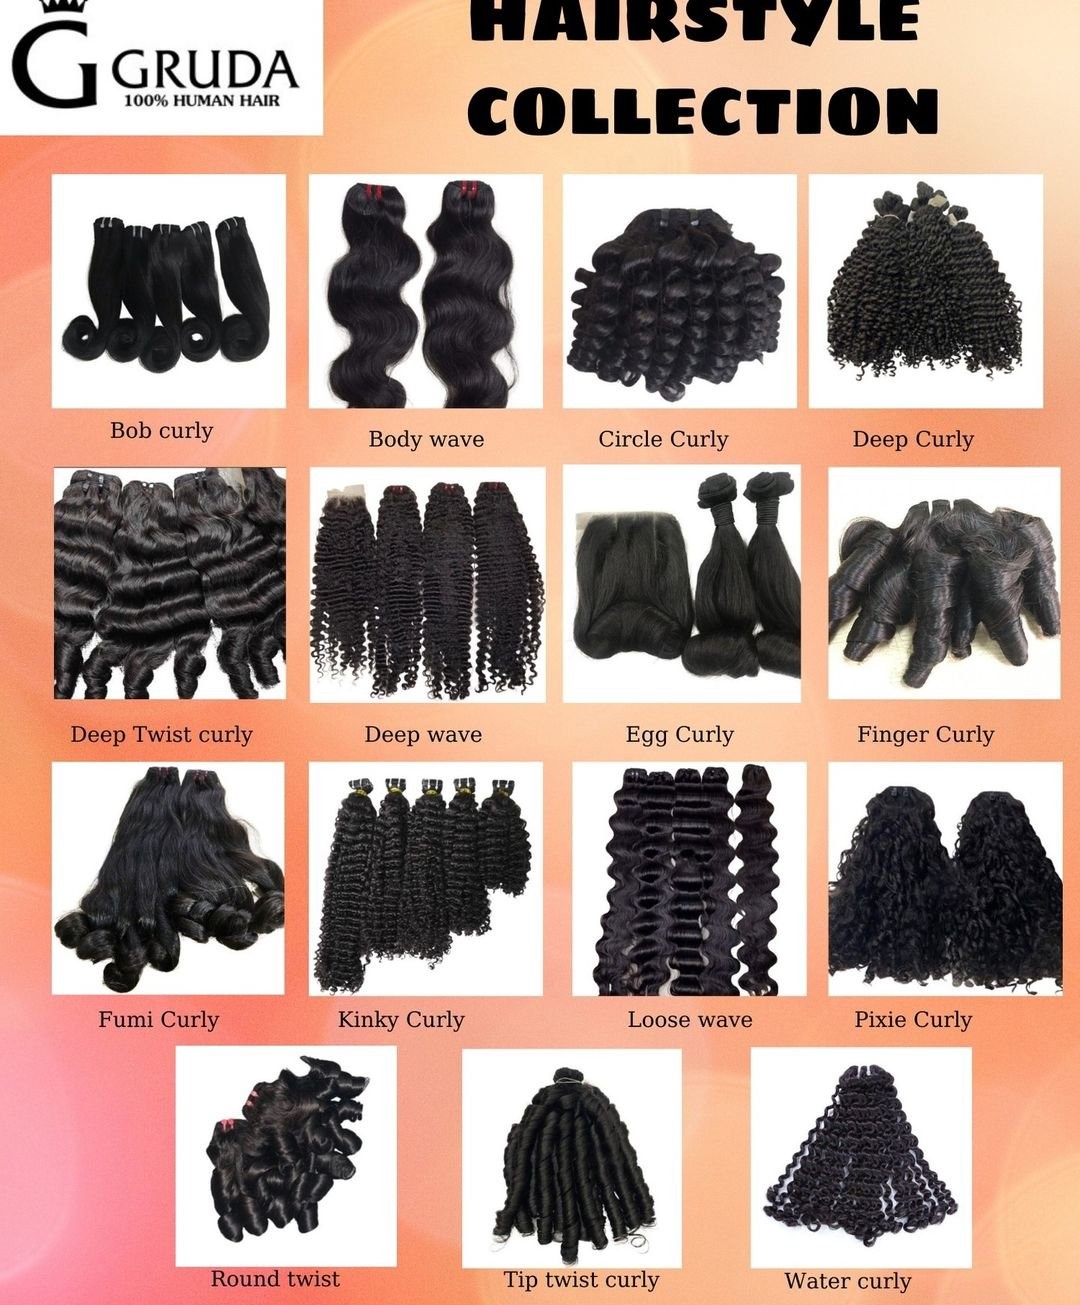 Hairstyle Collection